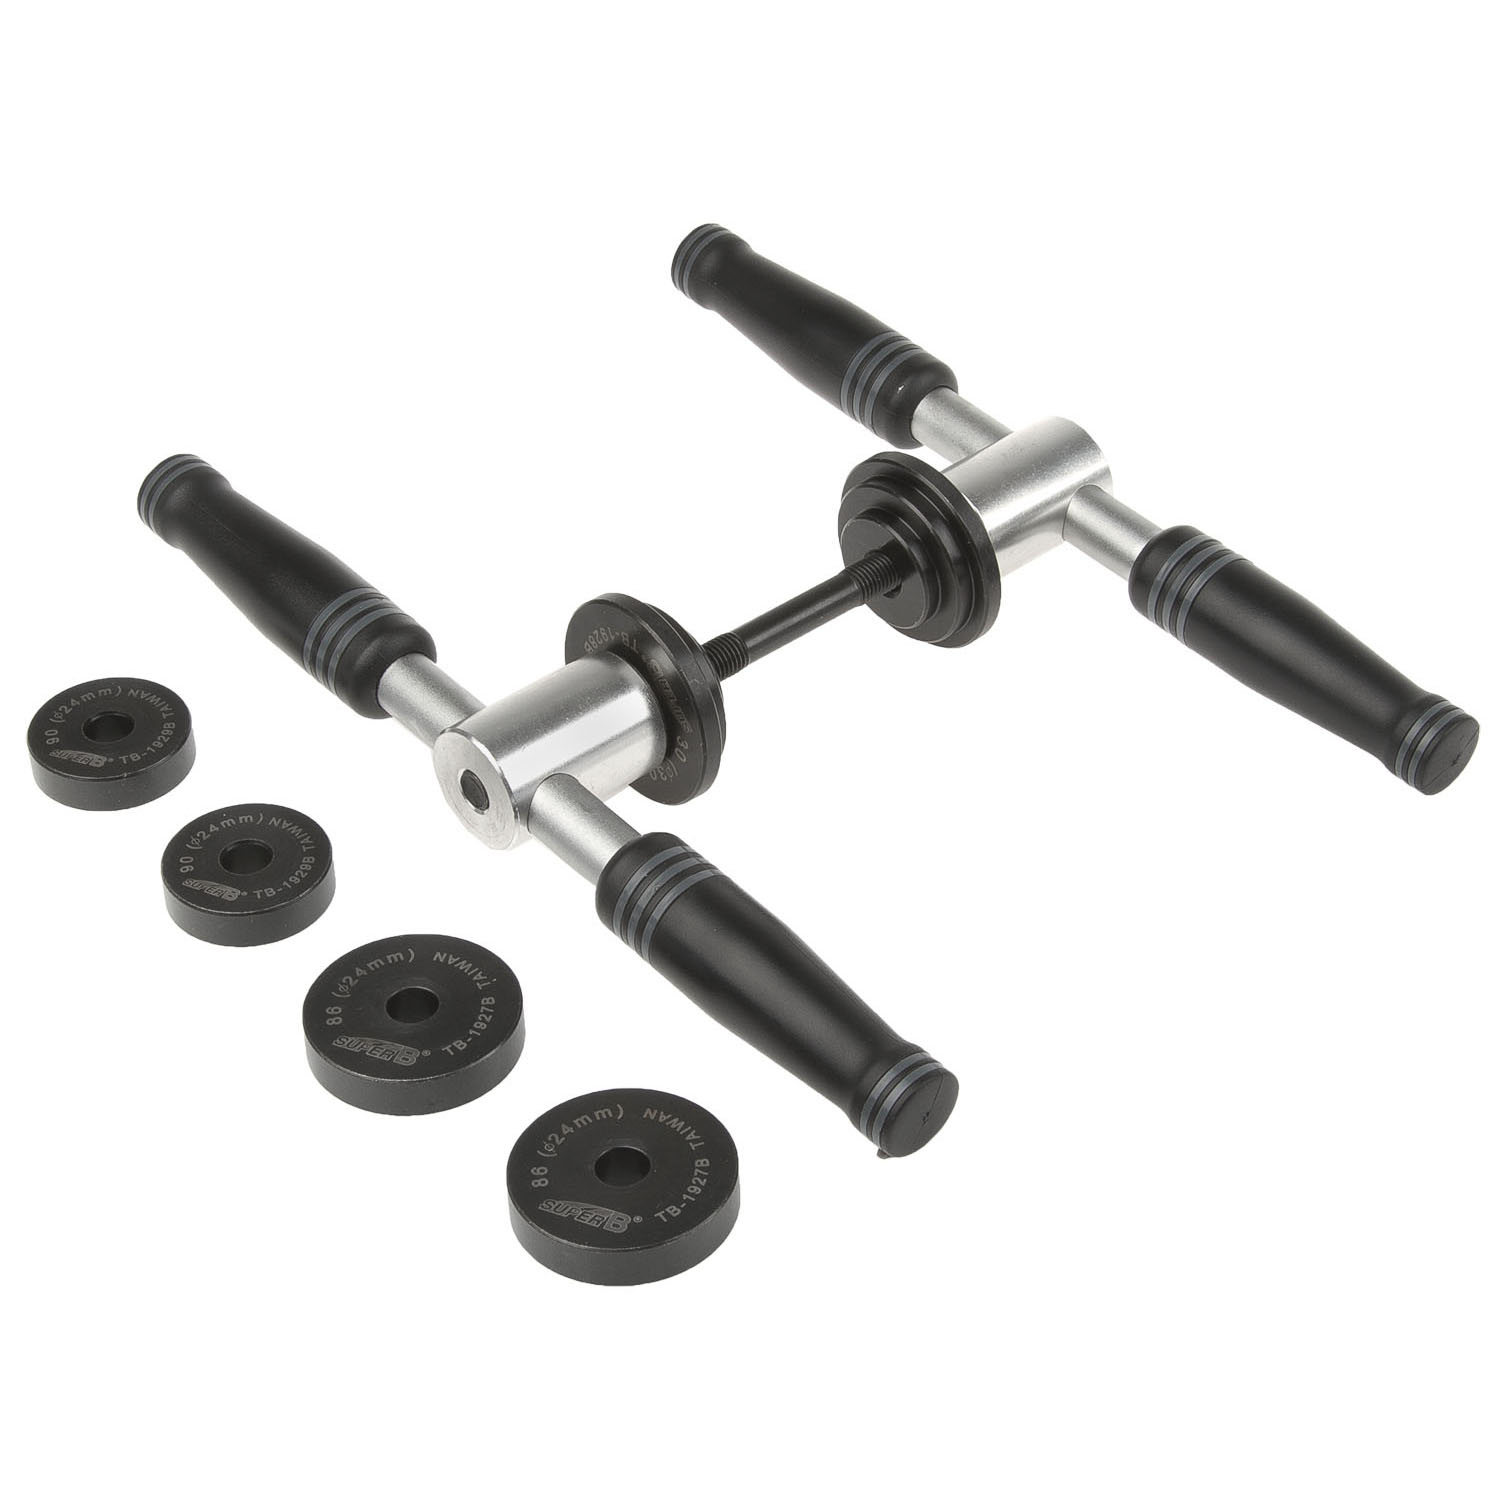 SUPER B TB-1900B bottom bracket press in tool – AVAILABLE IN SELECTED BIKE SHOPS